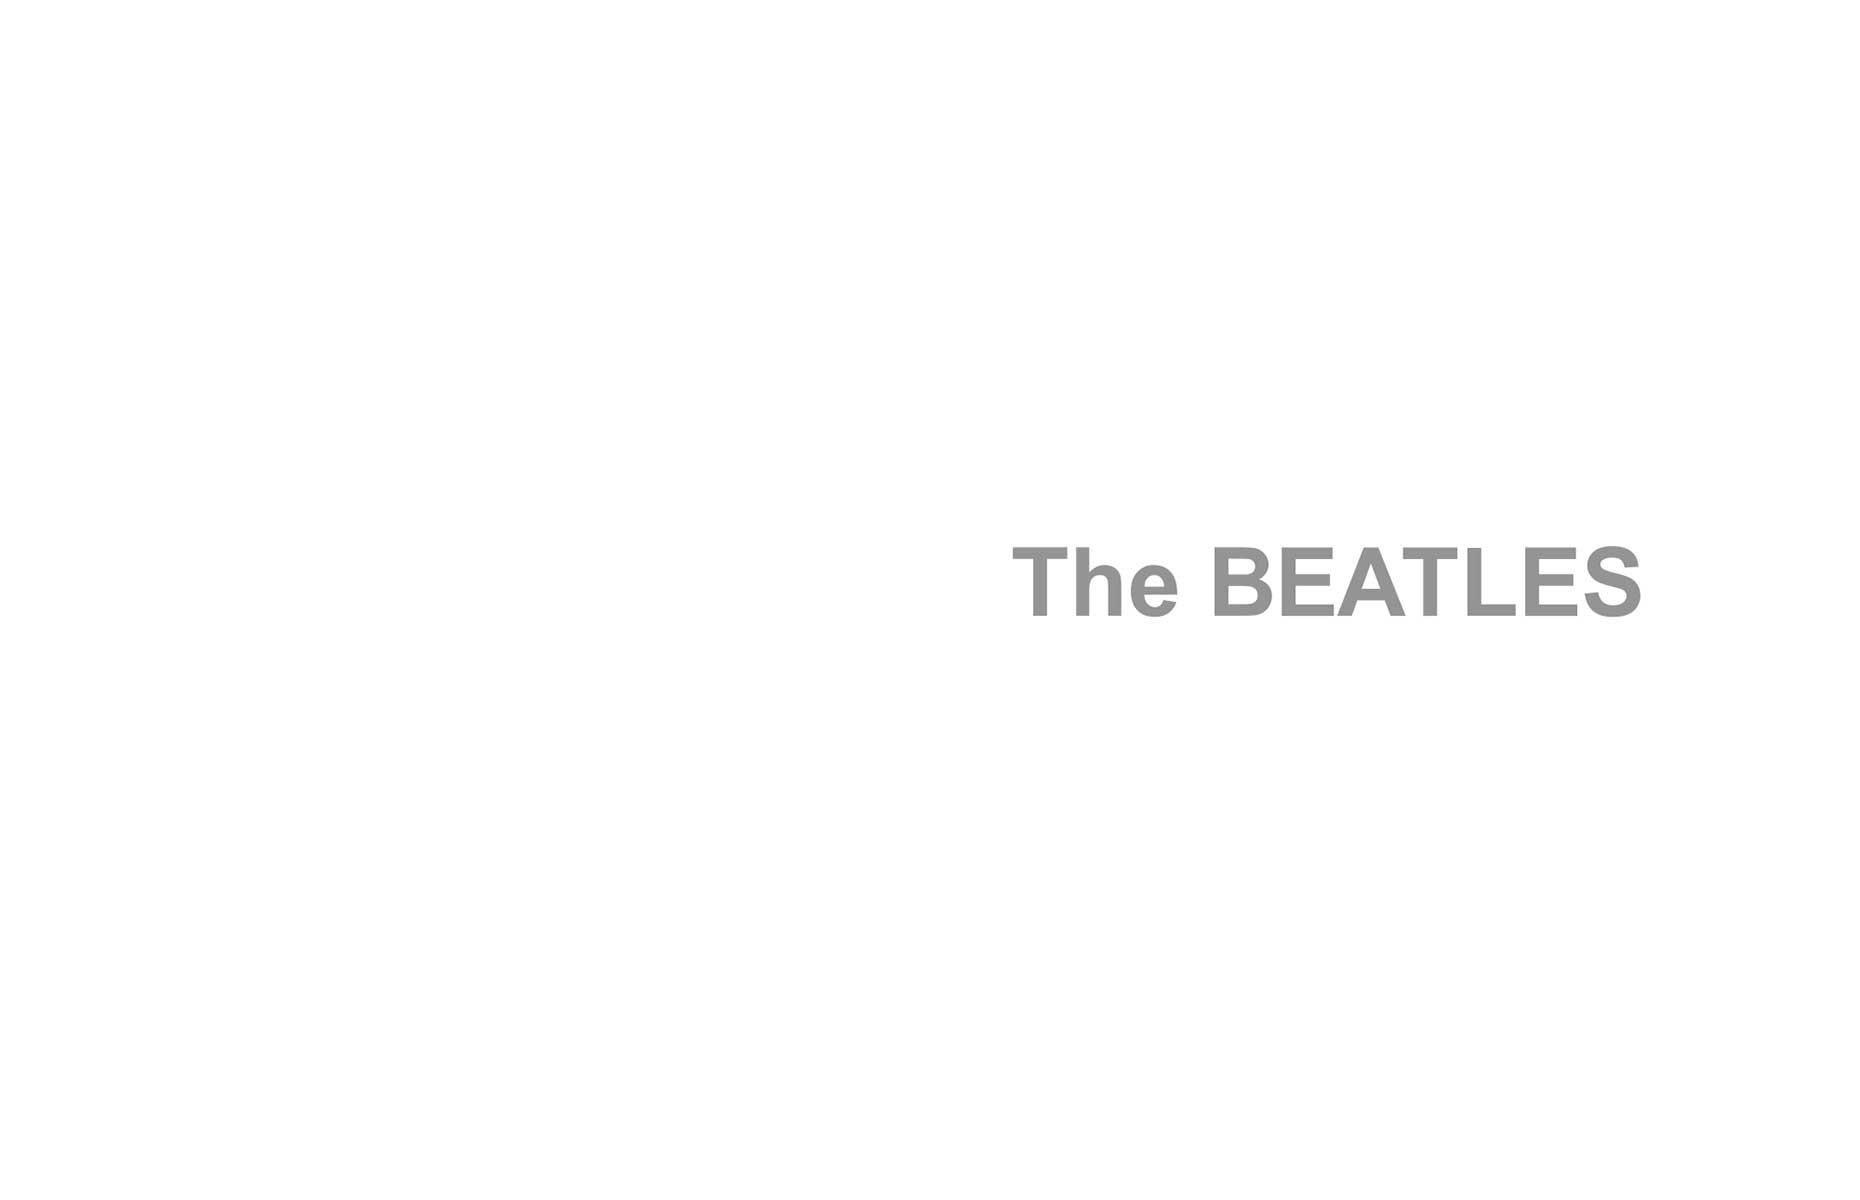 The Beatles – The White Album, up to £10,000